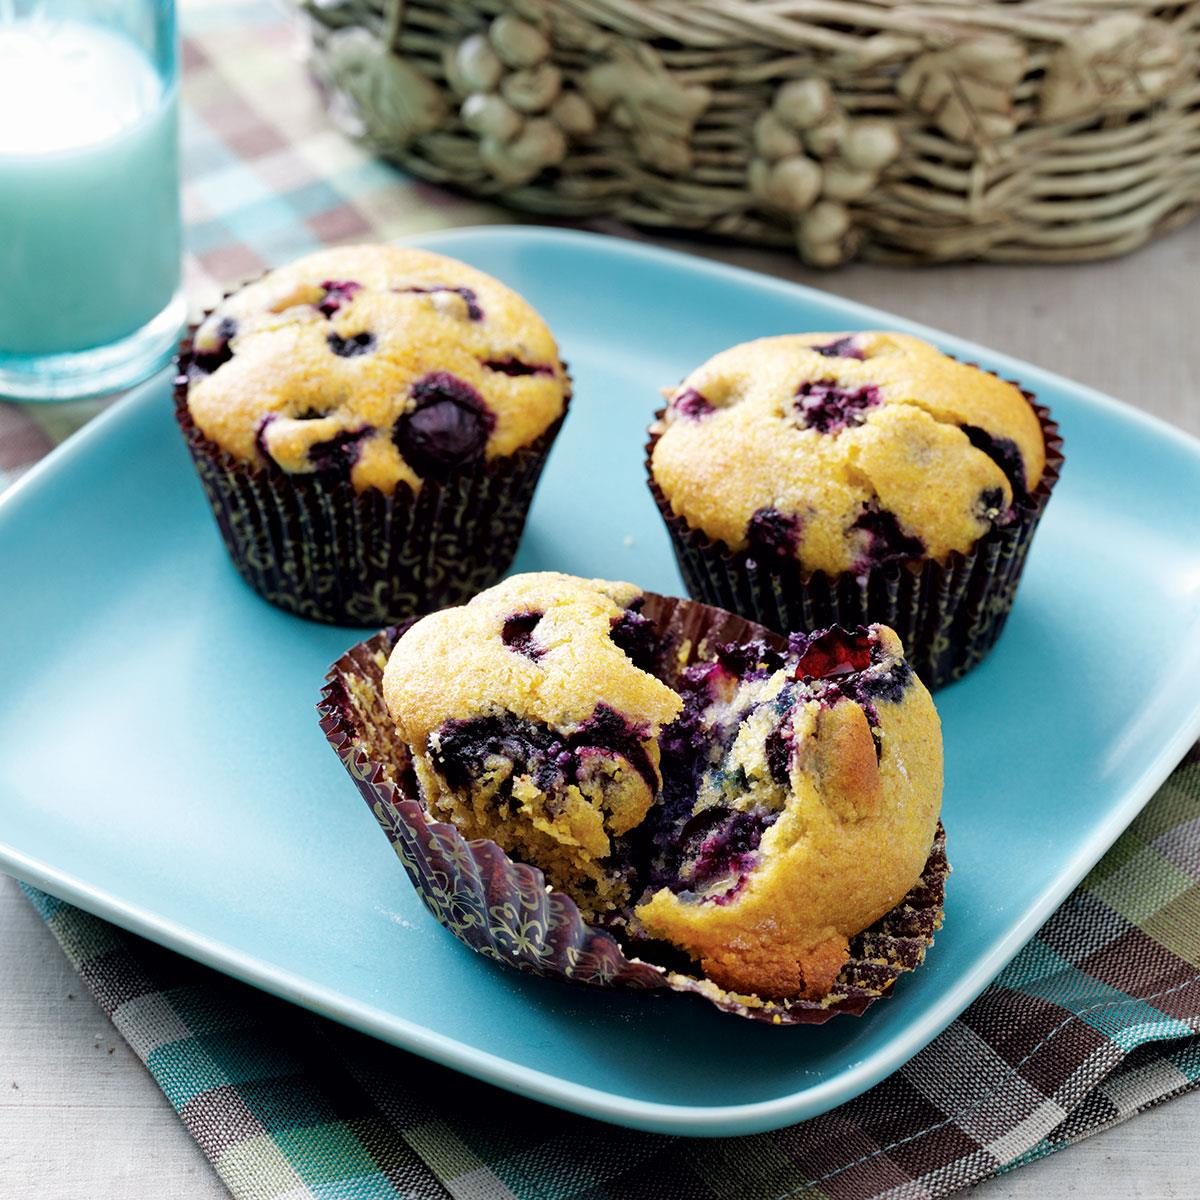 Baked Blueberry Cornmeal Muffins Recipe | Taste of Home